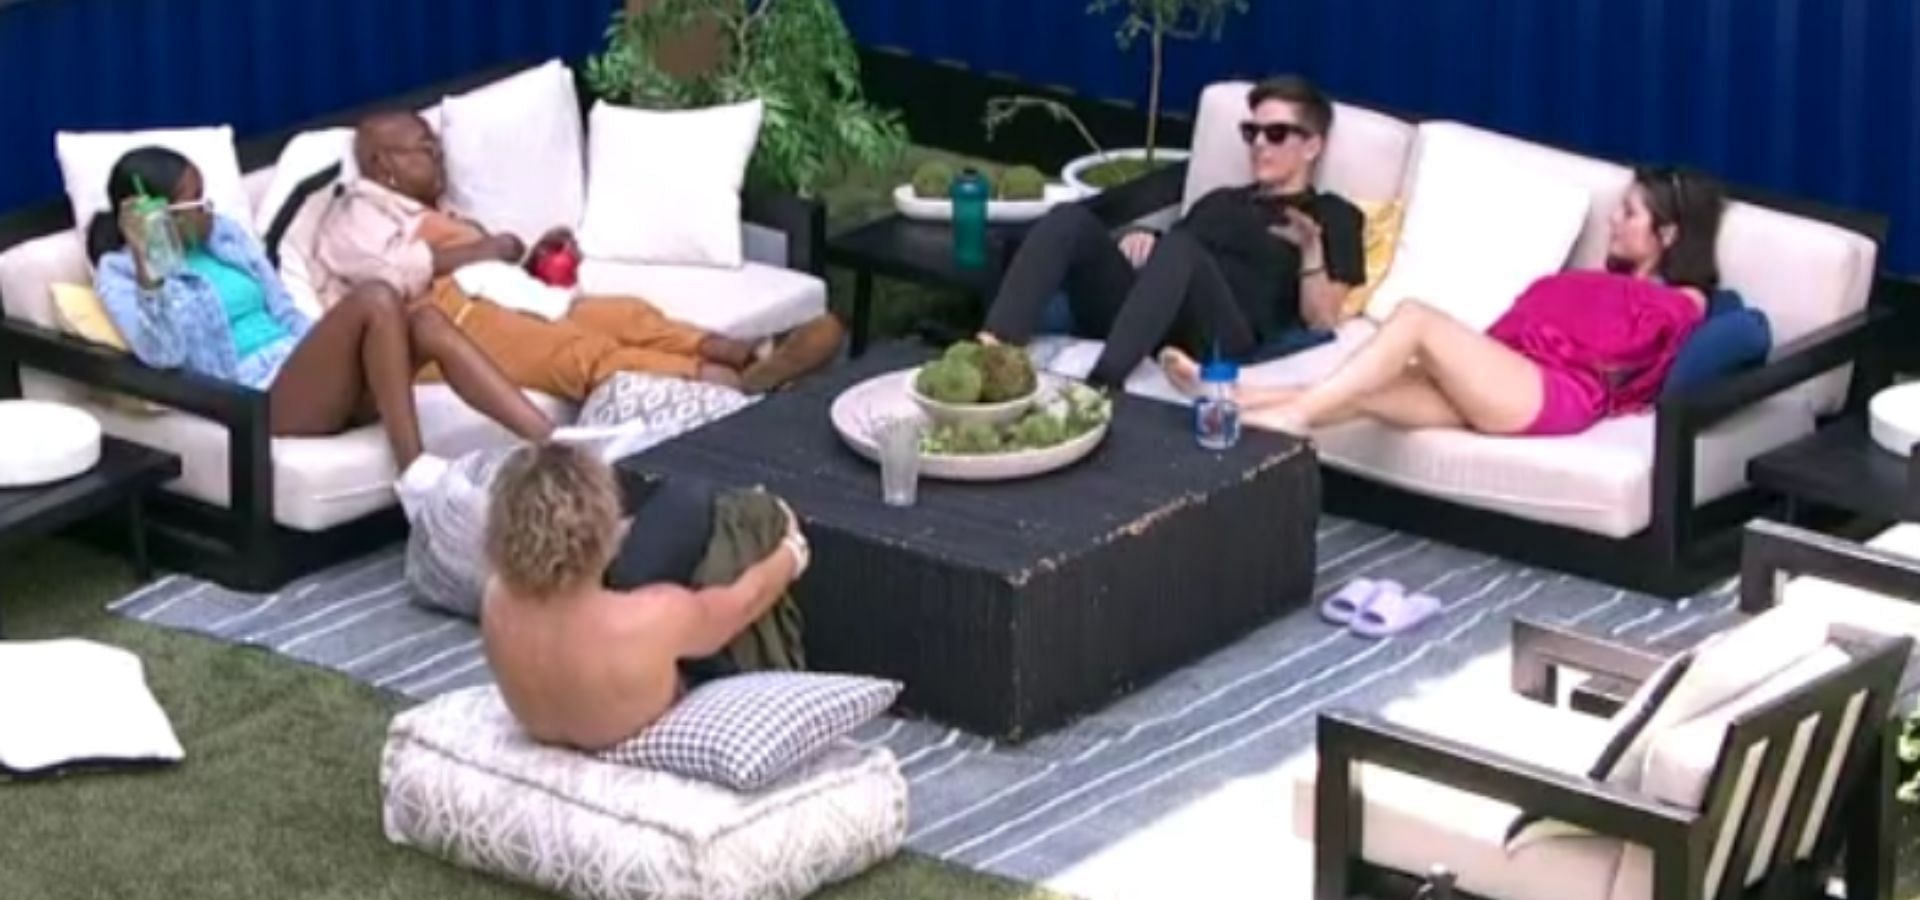 Labor day celebrations bring a brief respite amidst strategic plays in Big Brother house (image via Twitter/rbbq)